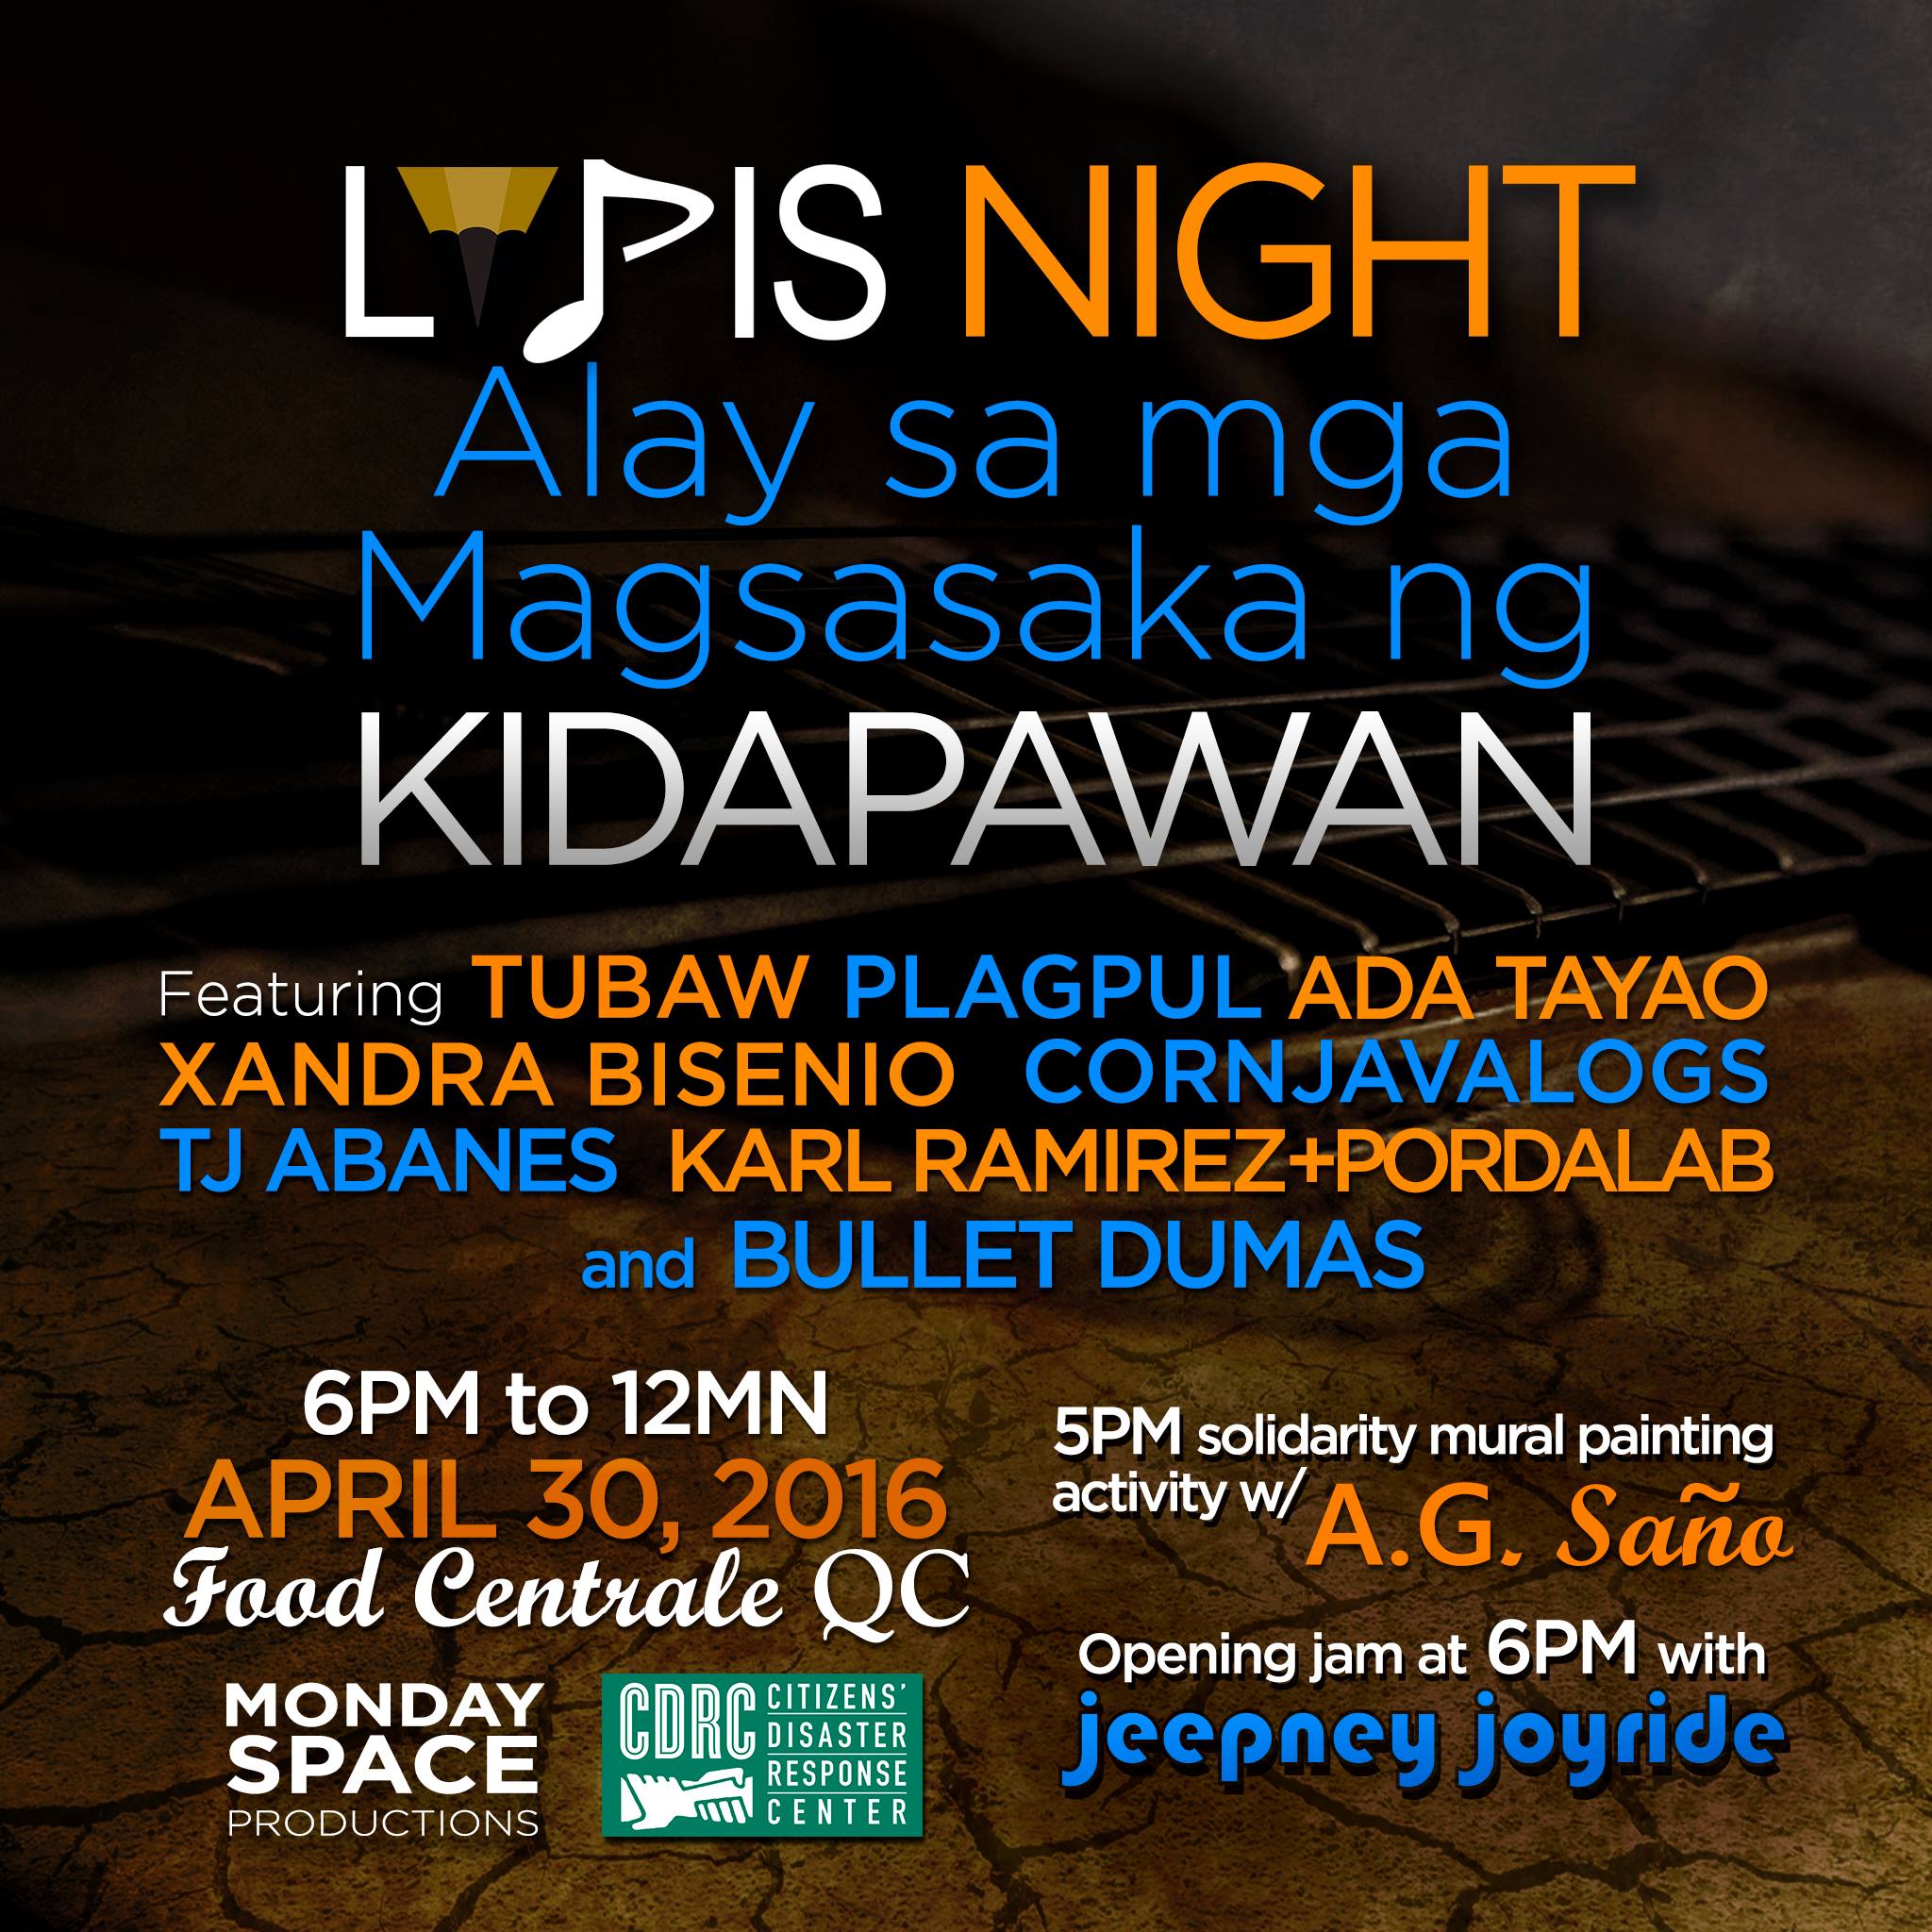 LAPIS Night Alay sa mga Magsasaka ng Kidapawan #BigasHindiBala clock Today at 5 PM - 11:59 PM Starts in about 14 hours · 84° Mostly Cloudy pin Show Map Food Centrale FOOD CENTRALE COMPOUND #3 Matahimik st. Cor. Malamig st., Brgy. Central, Quezon City, Philippines About Discussion Write Post Add Photo / Video Create Poll Details UPDATED! We open at 5PM with a solidarity mural painting activity with AG Sano (so bring the entire family to this kid-friendly activity) and an opening jam with Jeepney Joyride at 6PM. Music up until 12MN featuring Bullet Dumas, Plagpul, TUBAW, Cornjavalogs, Xandra Bisenio, TJ Abanes, Ada Tayao, and Karl Ramirez at ang Pordalab. The League of Authors of Public Interest Songs in partnership with Monday Space Productions, Food Centrale, and the Citizens' Disaster Response Center will hold a LAPIS Night for the farmers of Kidapawan on April 30, 2016 at the Food Centrale, Matahimik corner Malamig, UP Village Quezon City. Tickets at Php200 with Php75 consumable #MagAlaySaBayan CDs and LAPIS shirts available for sale at the event. Part of the proceeds will directly benefit emergency relief efforts for the drought-stricken farming communities in Kidapawan and North Cotabato coursed thru the Citizens' Disaster Response Center. For more information and ticket reservations please contact: LAPIS & Monday Space Productions Joycee Miranda +639988548584 Ada Tayao +639064509275 Citizens Disaster Response Center Landline: 9299822 9299820 Cellphone: +639065861984 Email: info@cdrc-phil.com For those nearby UP Diliman Edge Uyanguren +639293122972